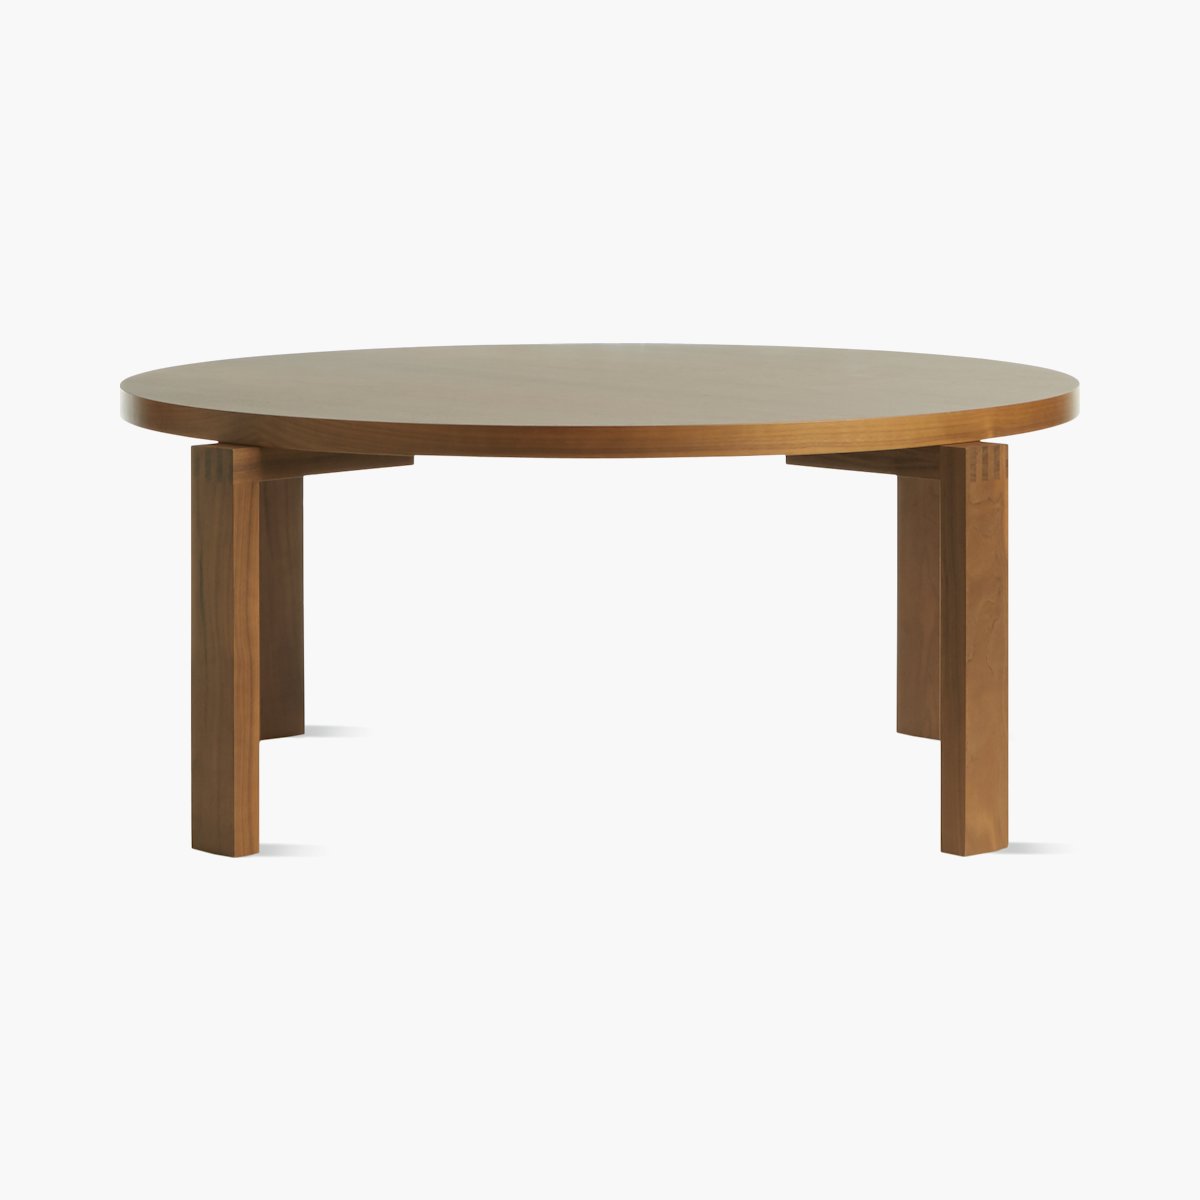 Risom Compass Table